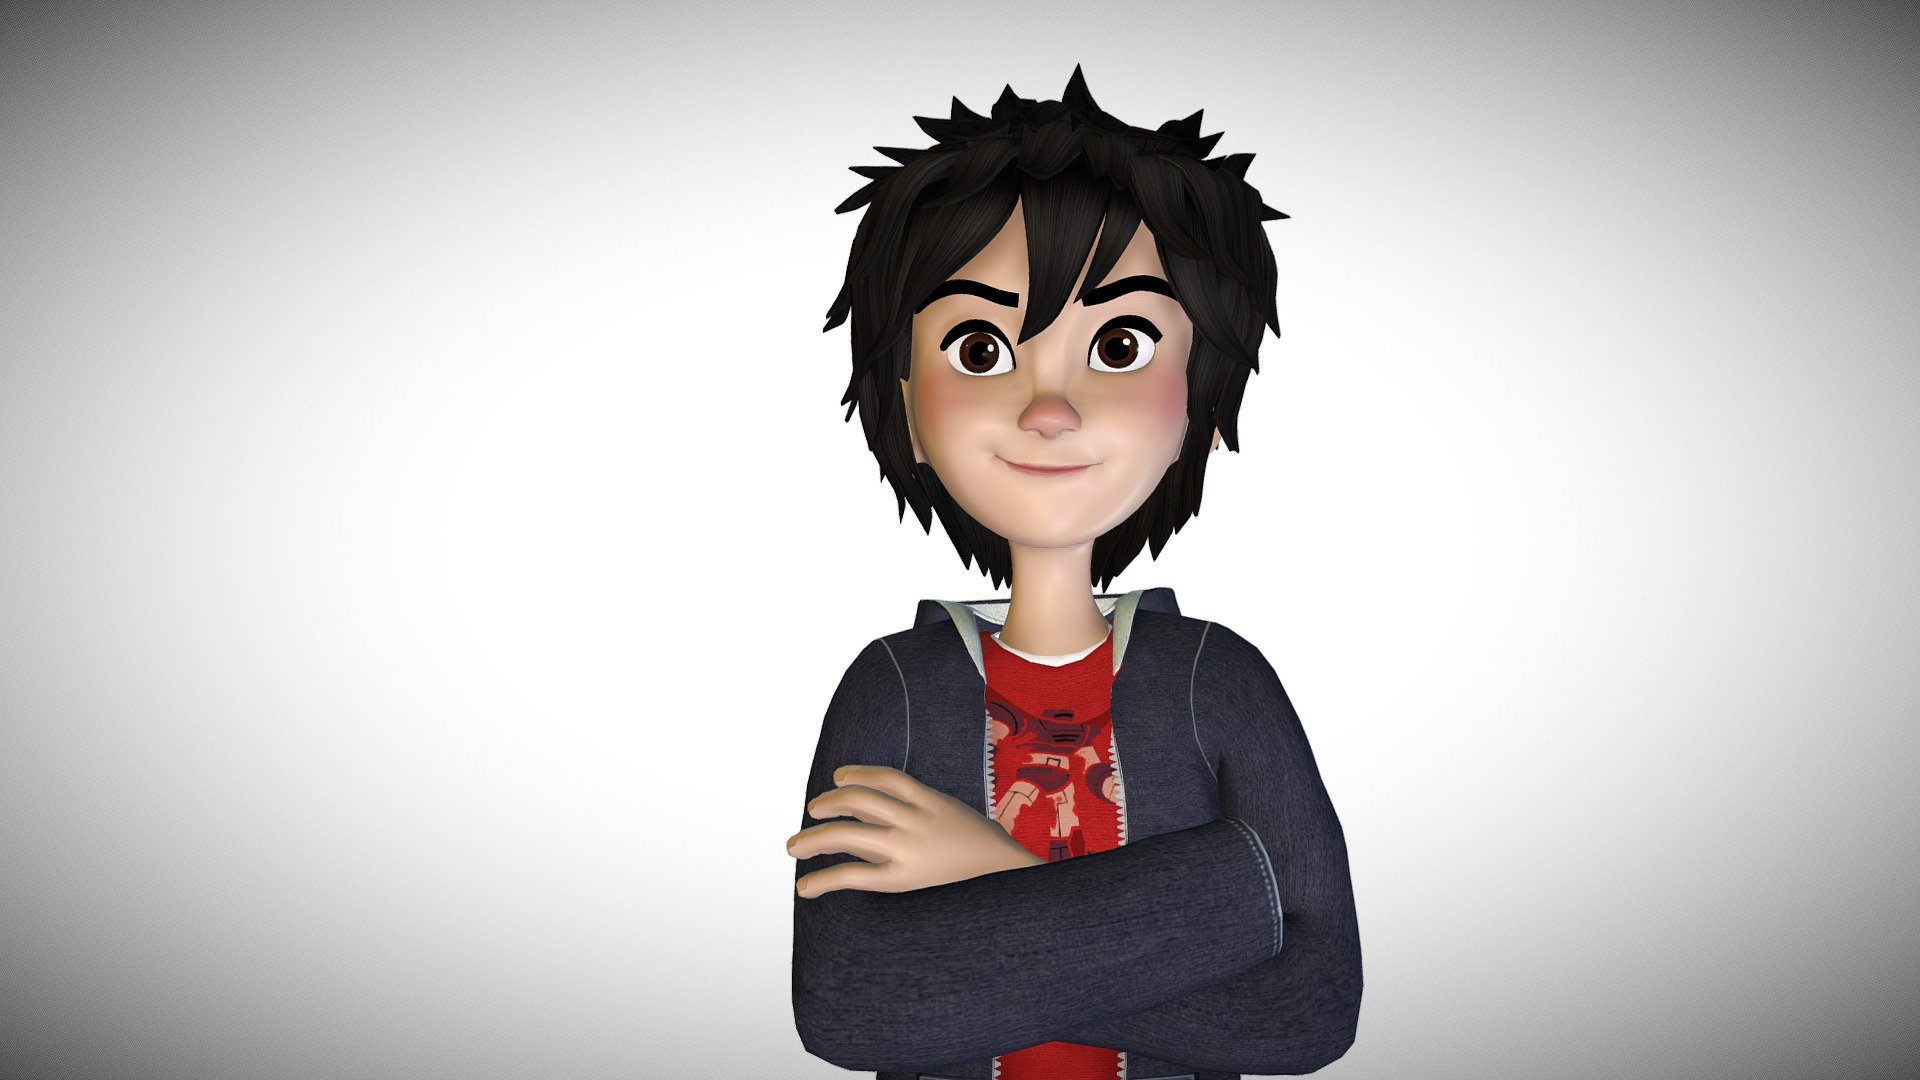 Hiro From Big hero 6 made for my personal project..
Check it out and comment - Hiro hamada - 3D model by annupanthaky 3d model